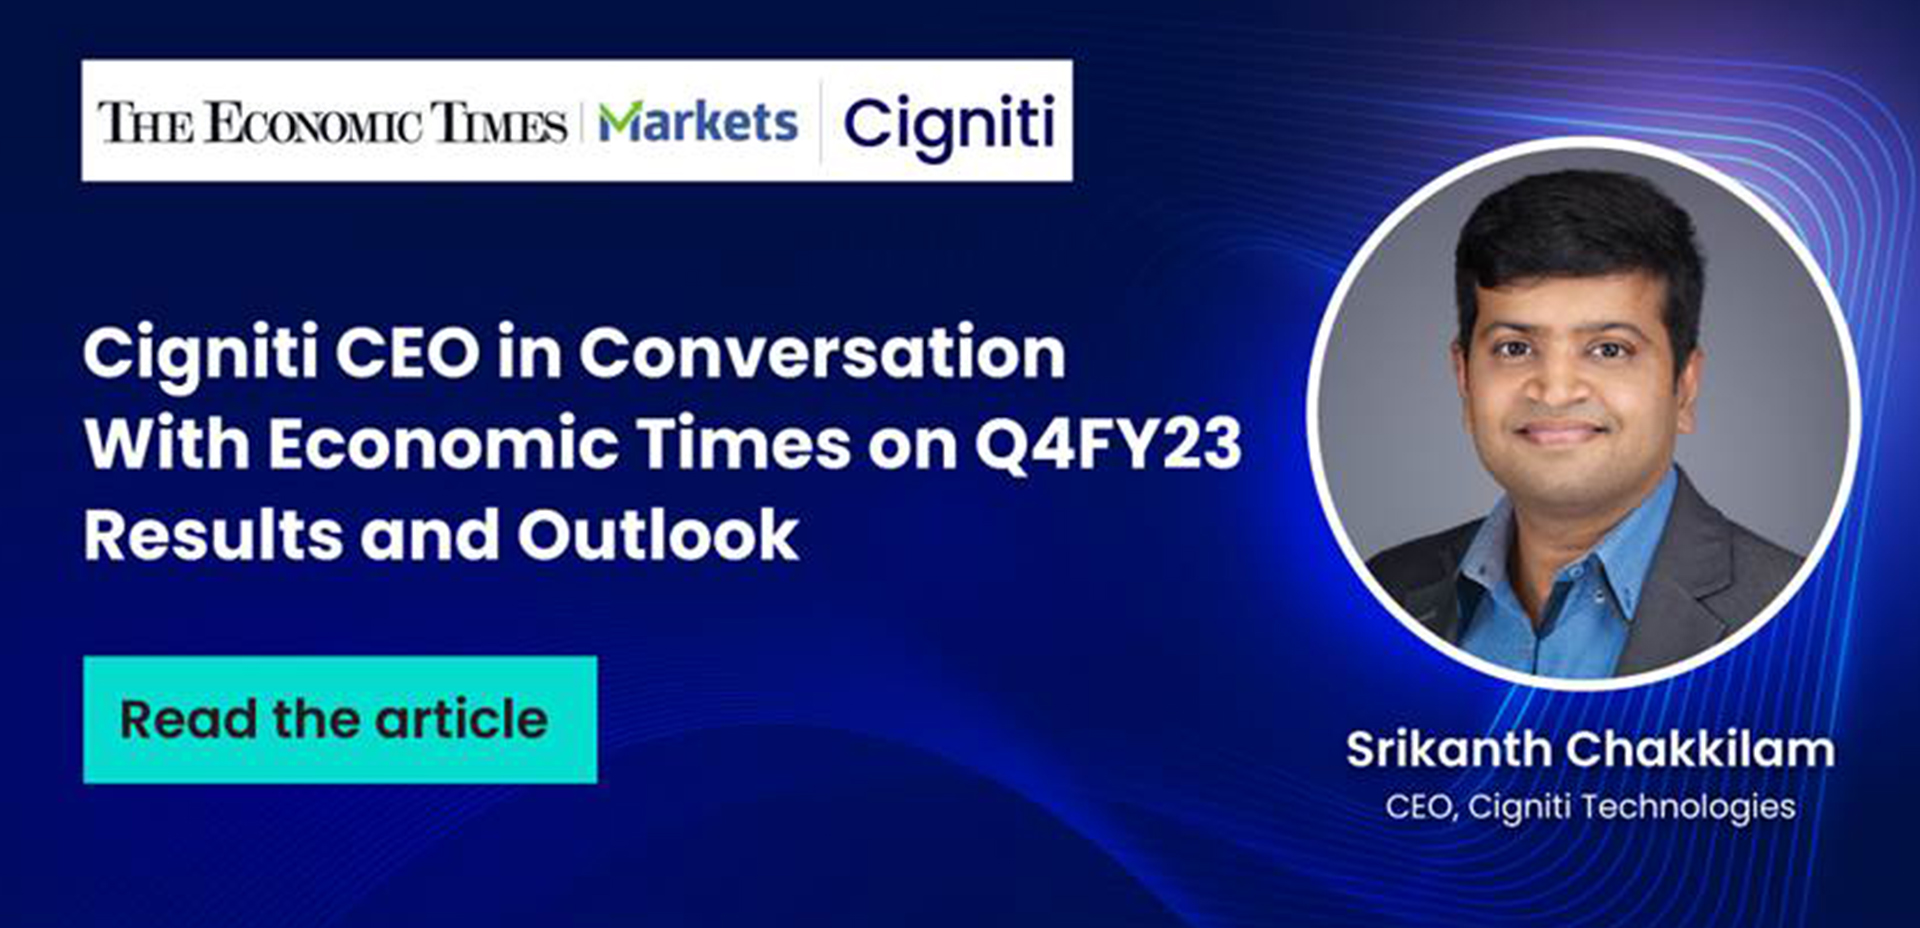 CEO's Interview with The Economic Times on Q4FY23 Results and Outlook